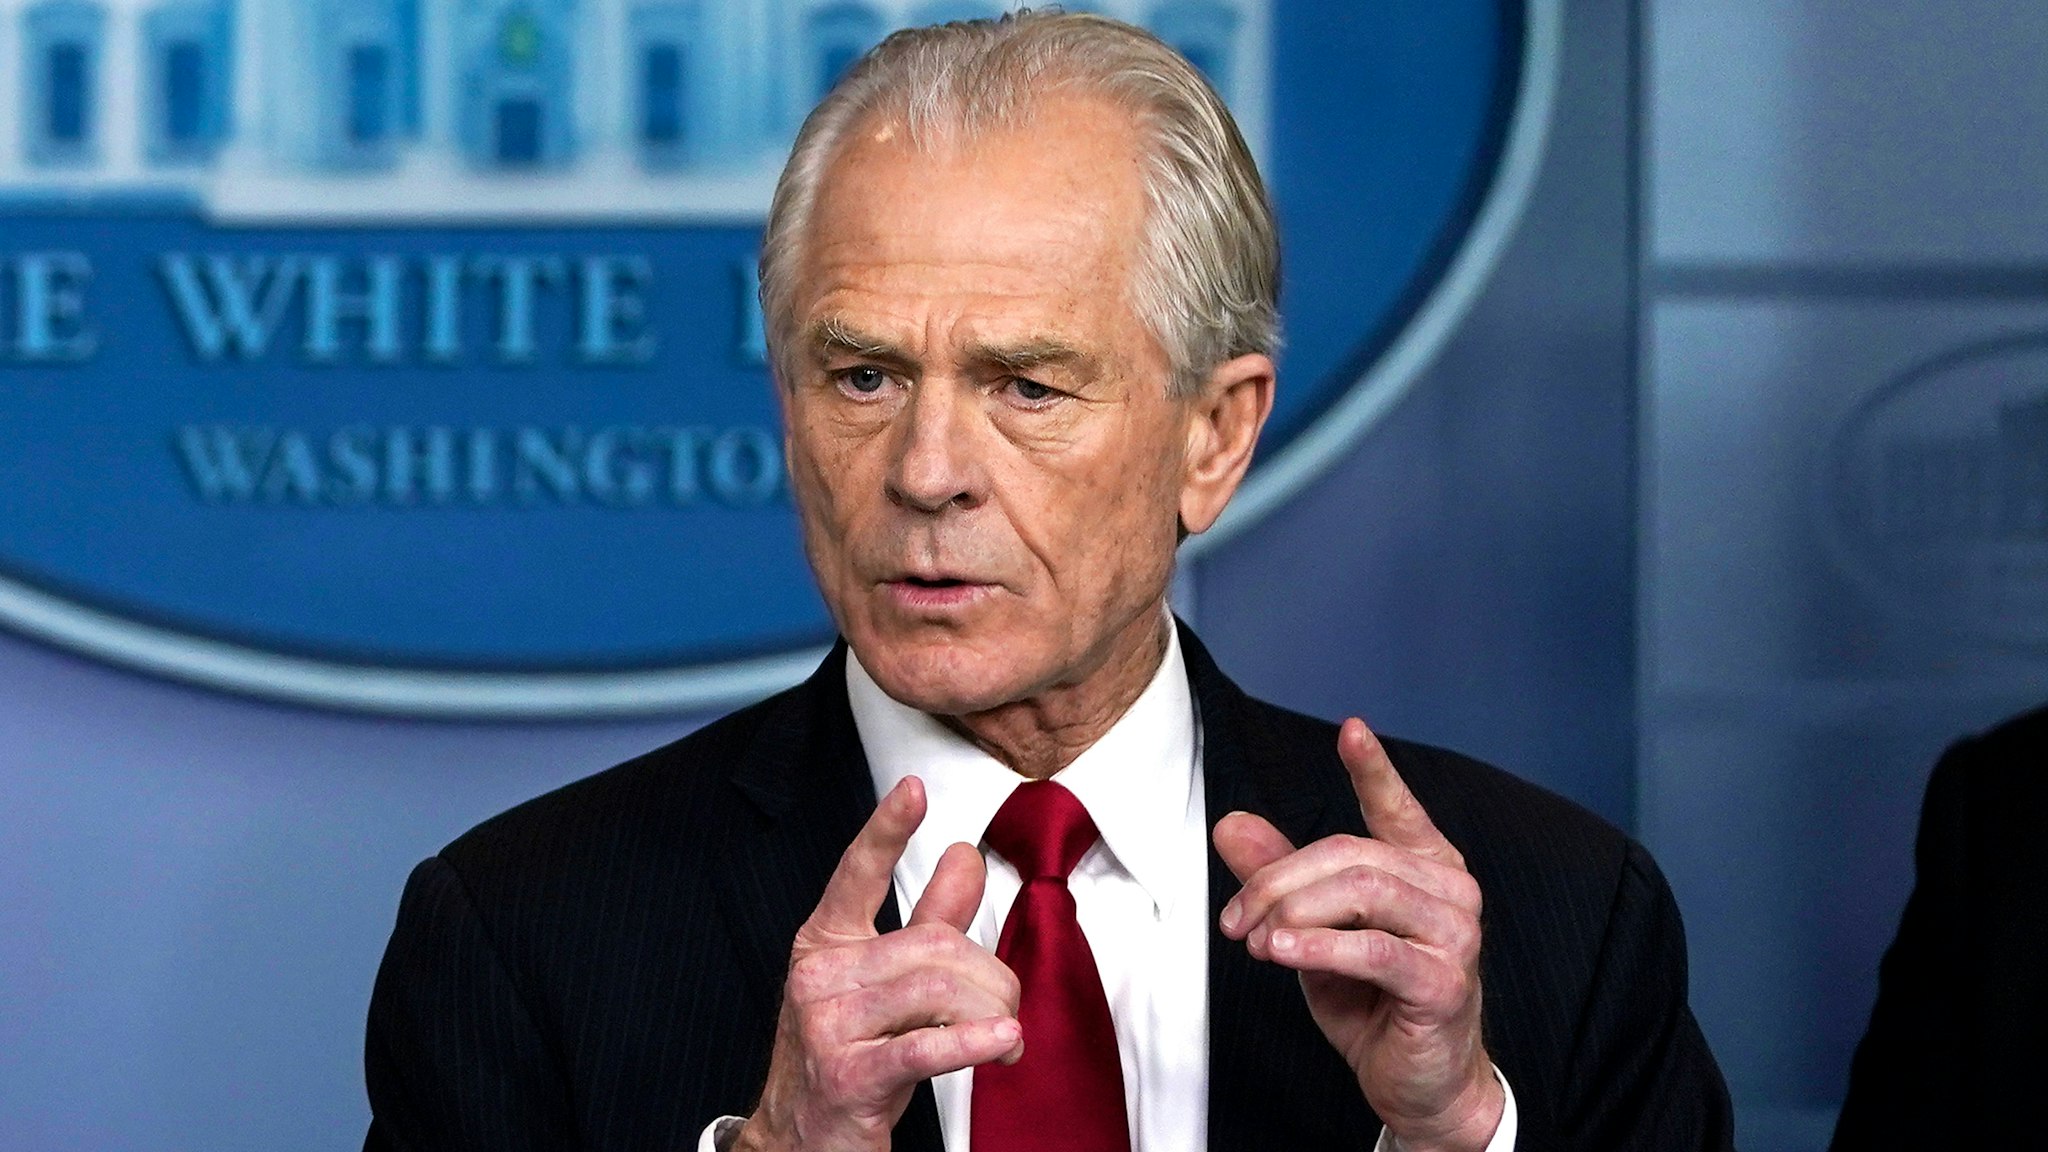 WASHINGTON, DC - MARCH 27: White House Trade and Manufacturing Policy Director Peter Navarro speaks during a briefing on the coronavirus pandemic in the press briefing room of the White House on March 27, 2020 in Washington, DC. President Trump signed the H.R. 748, the CARES Act on Friday afternoon. Earlier in the day, the U.S. House of Representatives approved the $2 trillion stimulus bill that lawmakers hope will battle the economic effects of the COVID-19 pandemic.